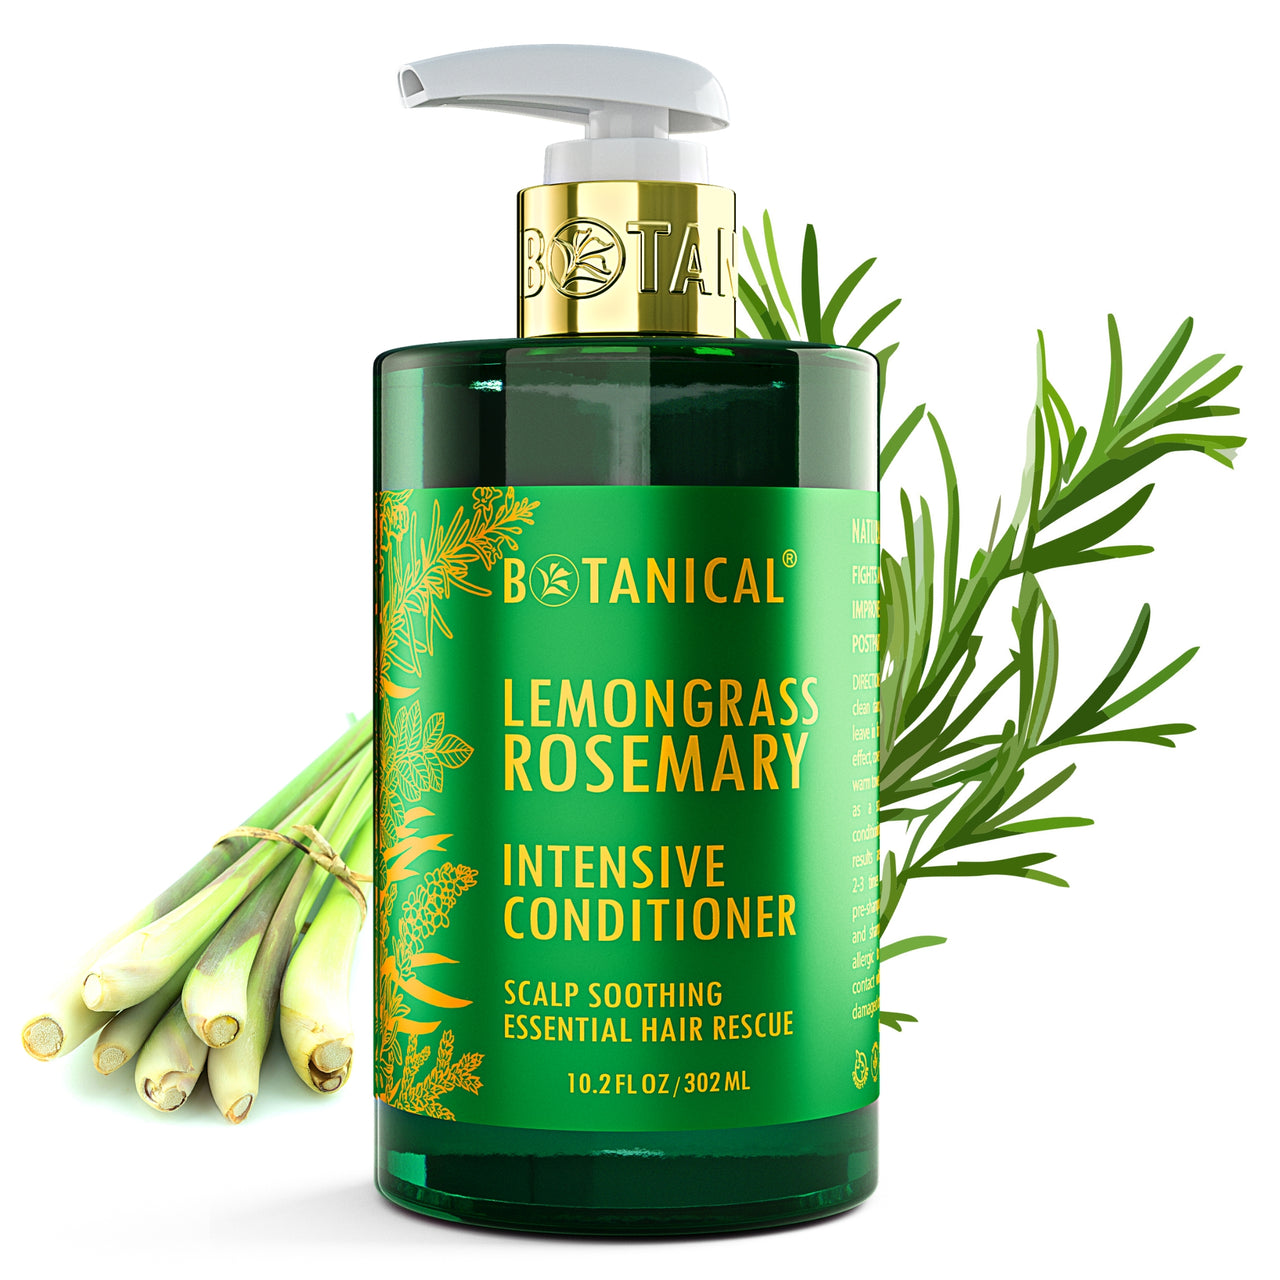 Lemongrass & Rosemary Conditioner For Thinning Hair - Scalp Soothing - 10.2 Fl Oz